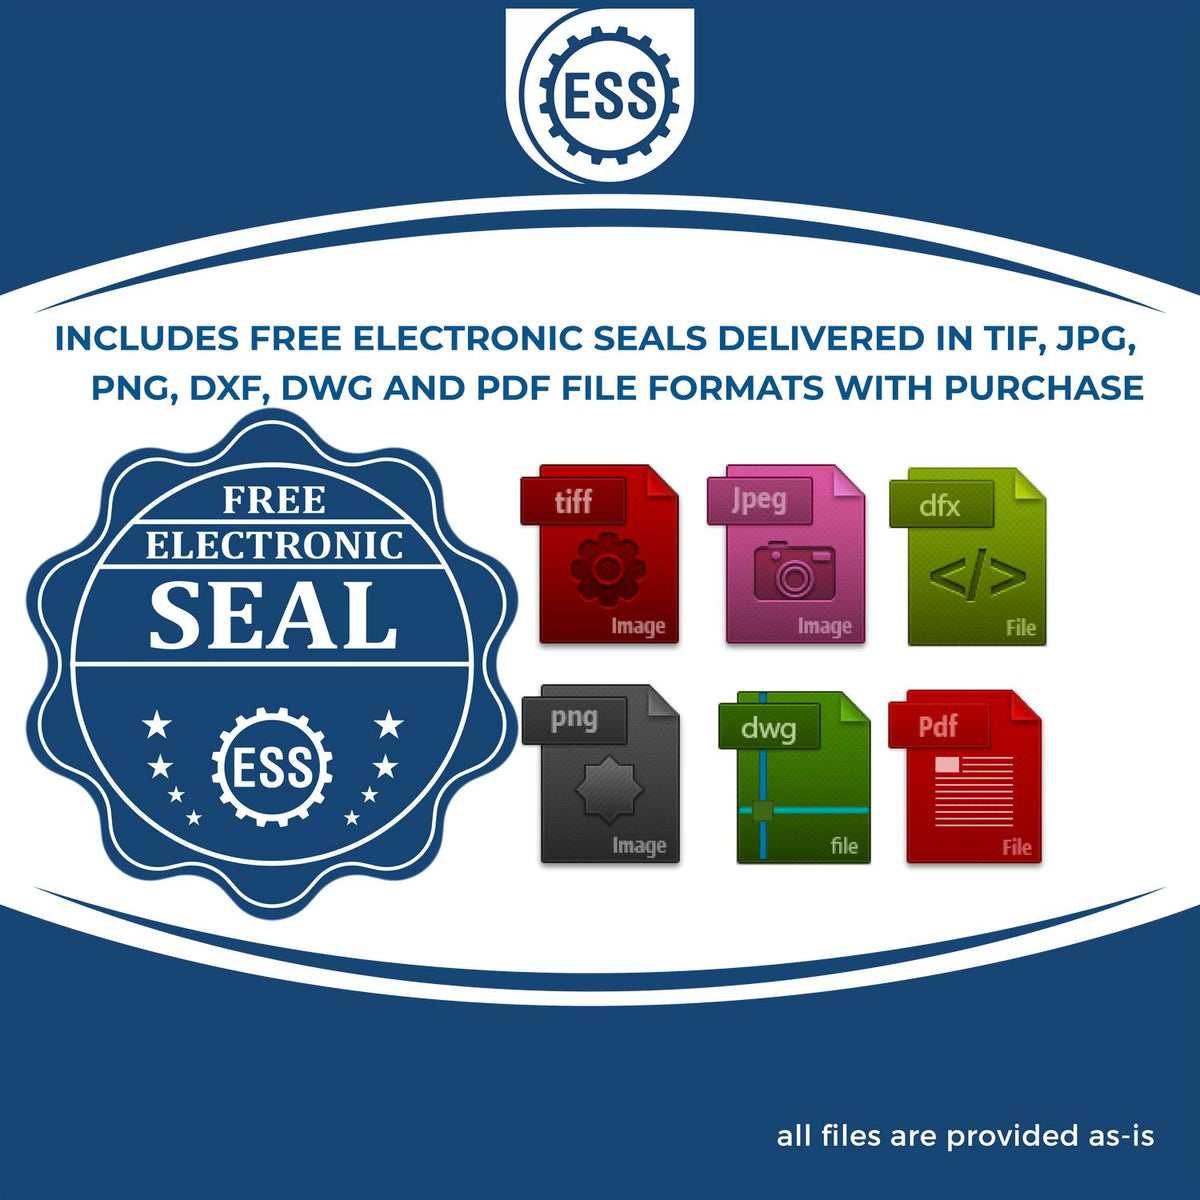 An infographic for the free electronic seal for the Florida Desk Architect Embossing Seal illustrating the different file type icons such as DXF, DWG, TIF, JPG and PNG.